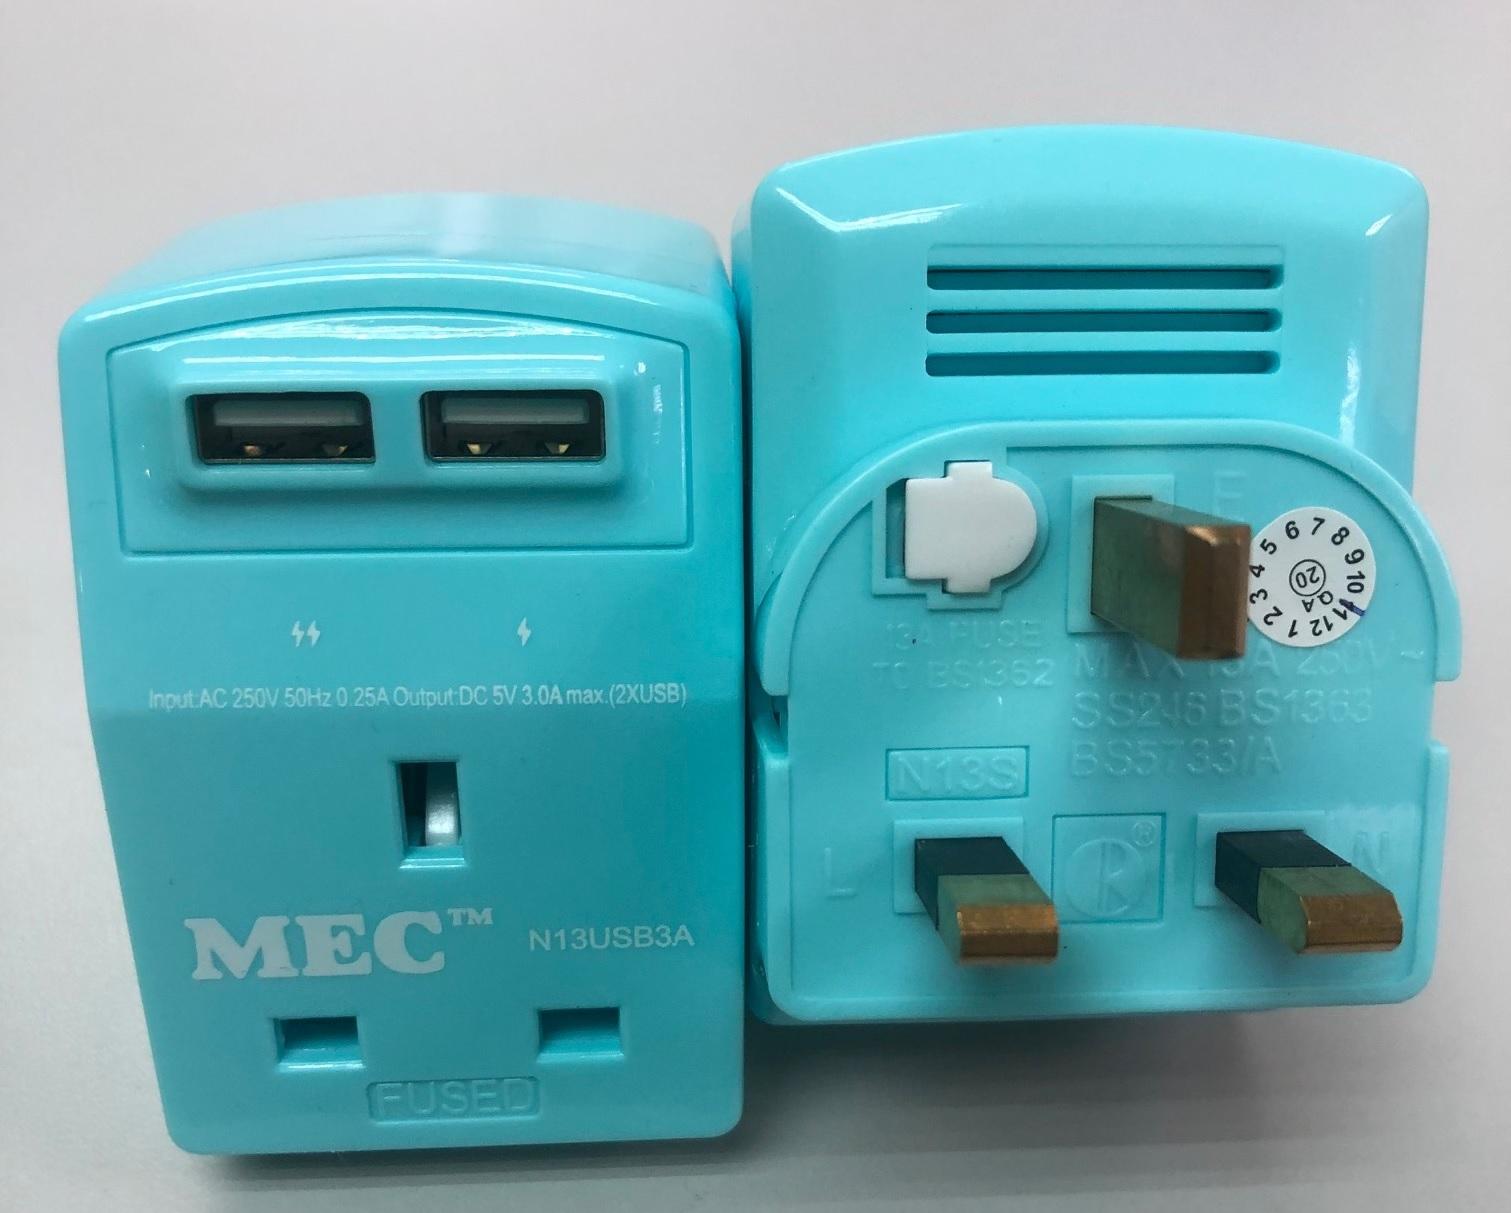 The Electrical and Mechanical Services Department today (May 13) urged the public to stop using a model of MEC adaptor with the model number N13USB3A. Photo shows the adaptor in blue and its product markings.